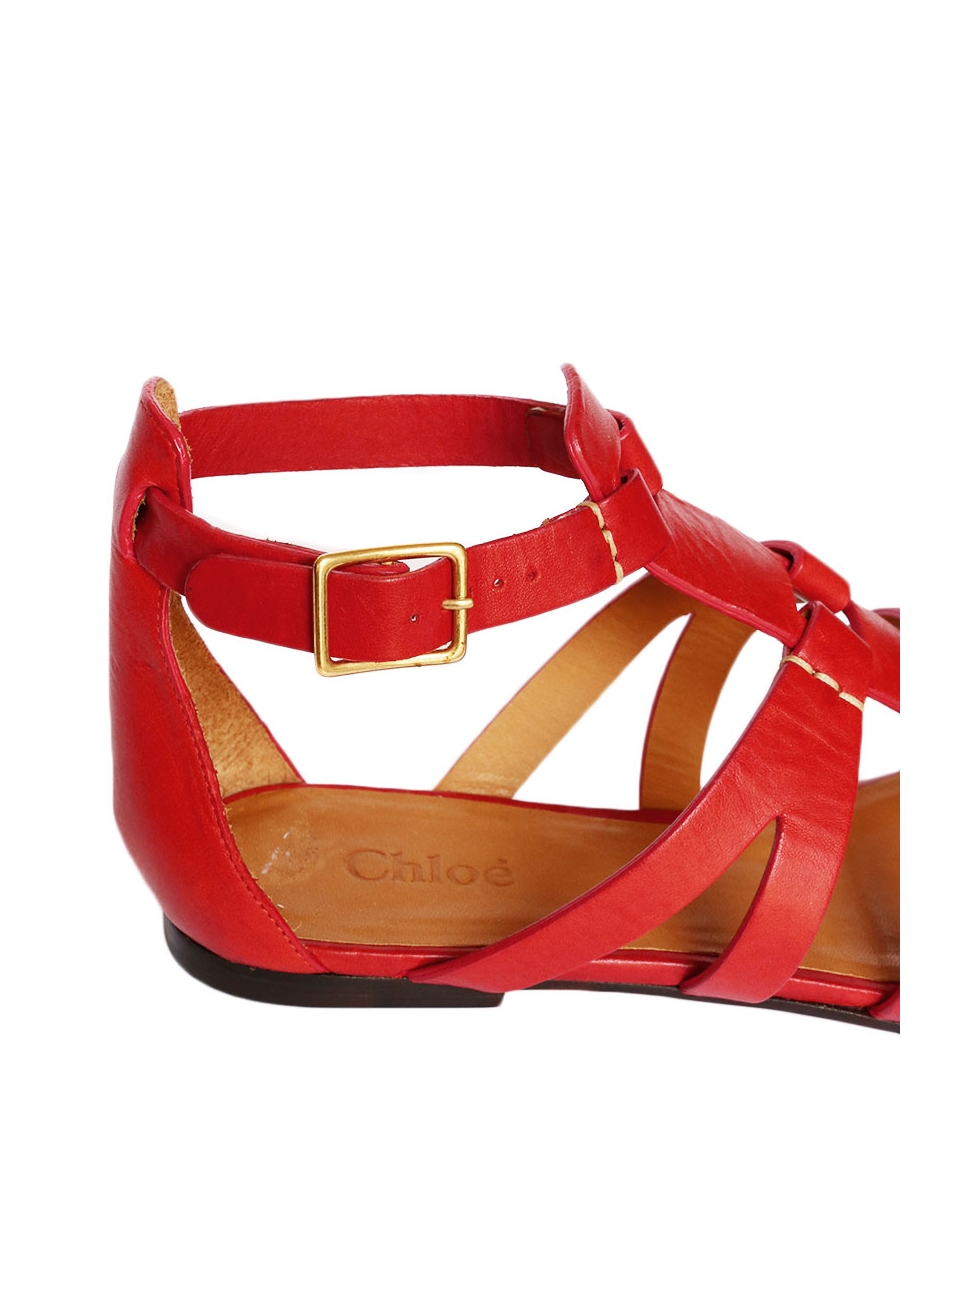 Boutique CHLOE Bright red leather multi-strap gladiator sandals NEW Retail  price 475€ Size 36.5